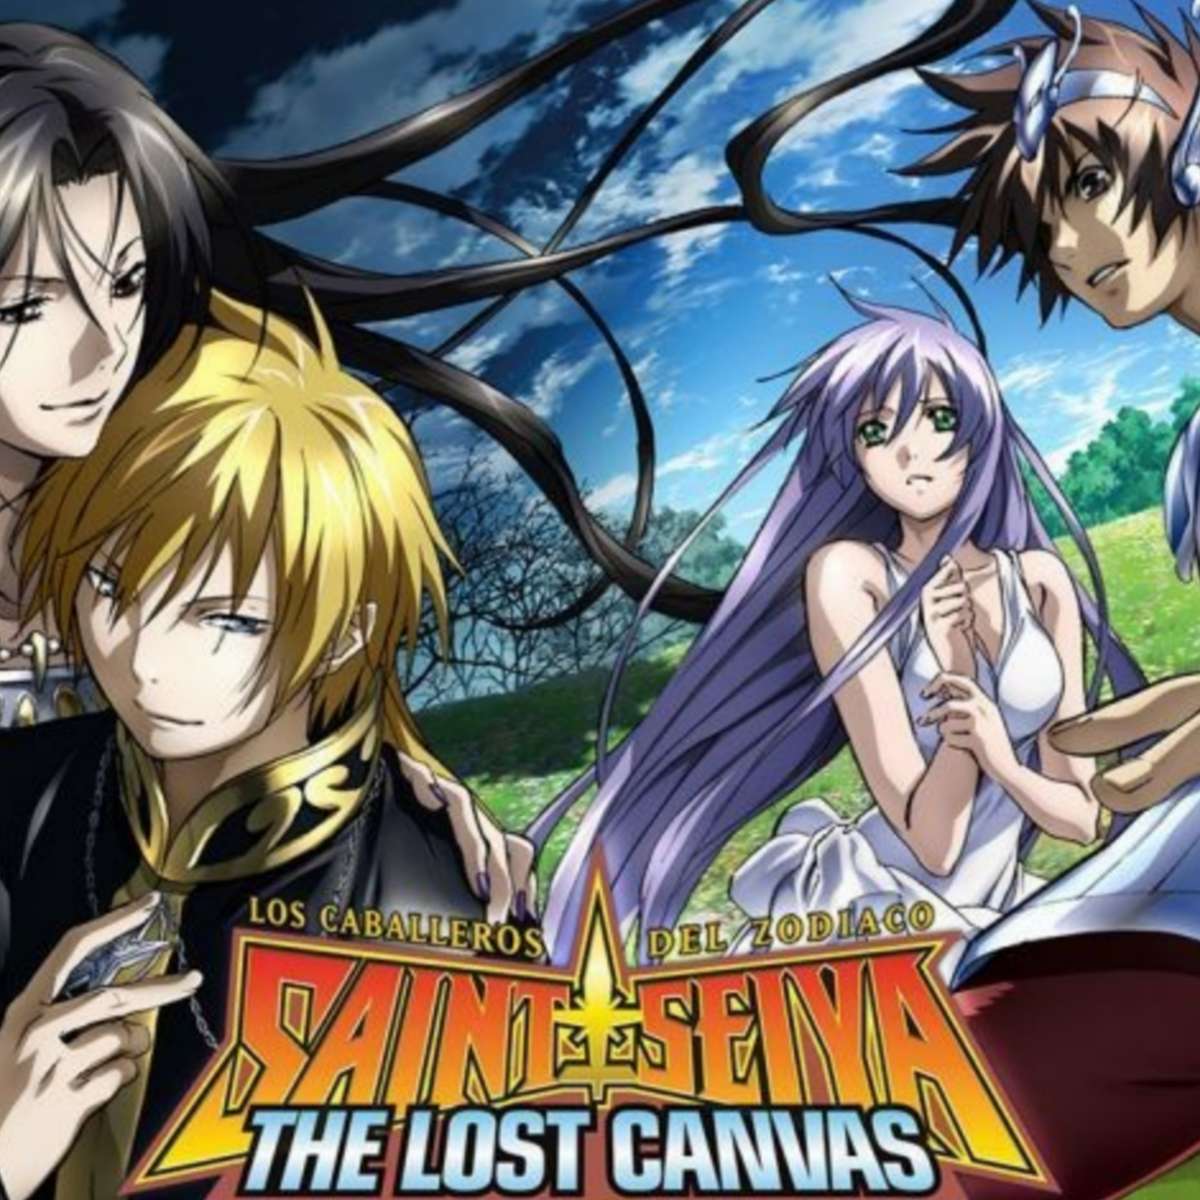 THE KNIGHTS OF THE ZODIAC: THE LOST CANDAS IN SHI pussel på nätet